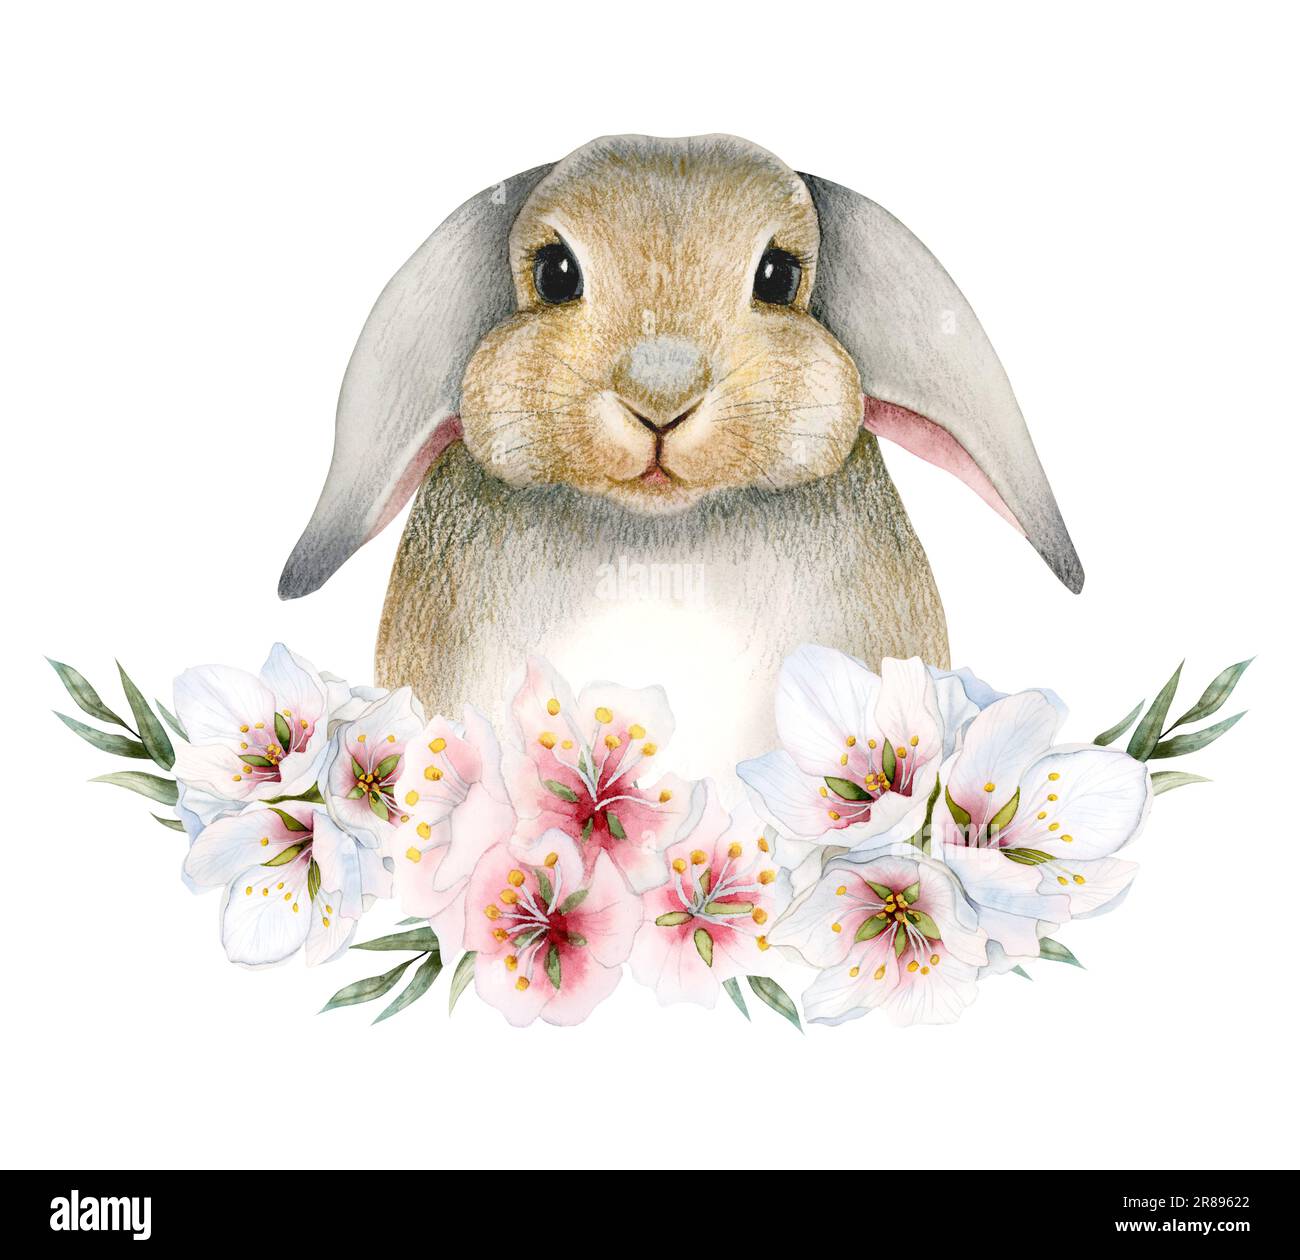 Watercolor Easter rabbit with spring pink white flowers and leaves wreath illustration isolated on white background Stock Photo